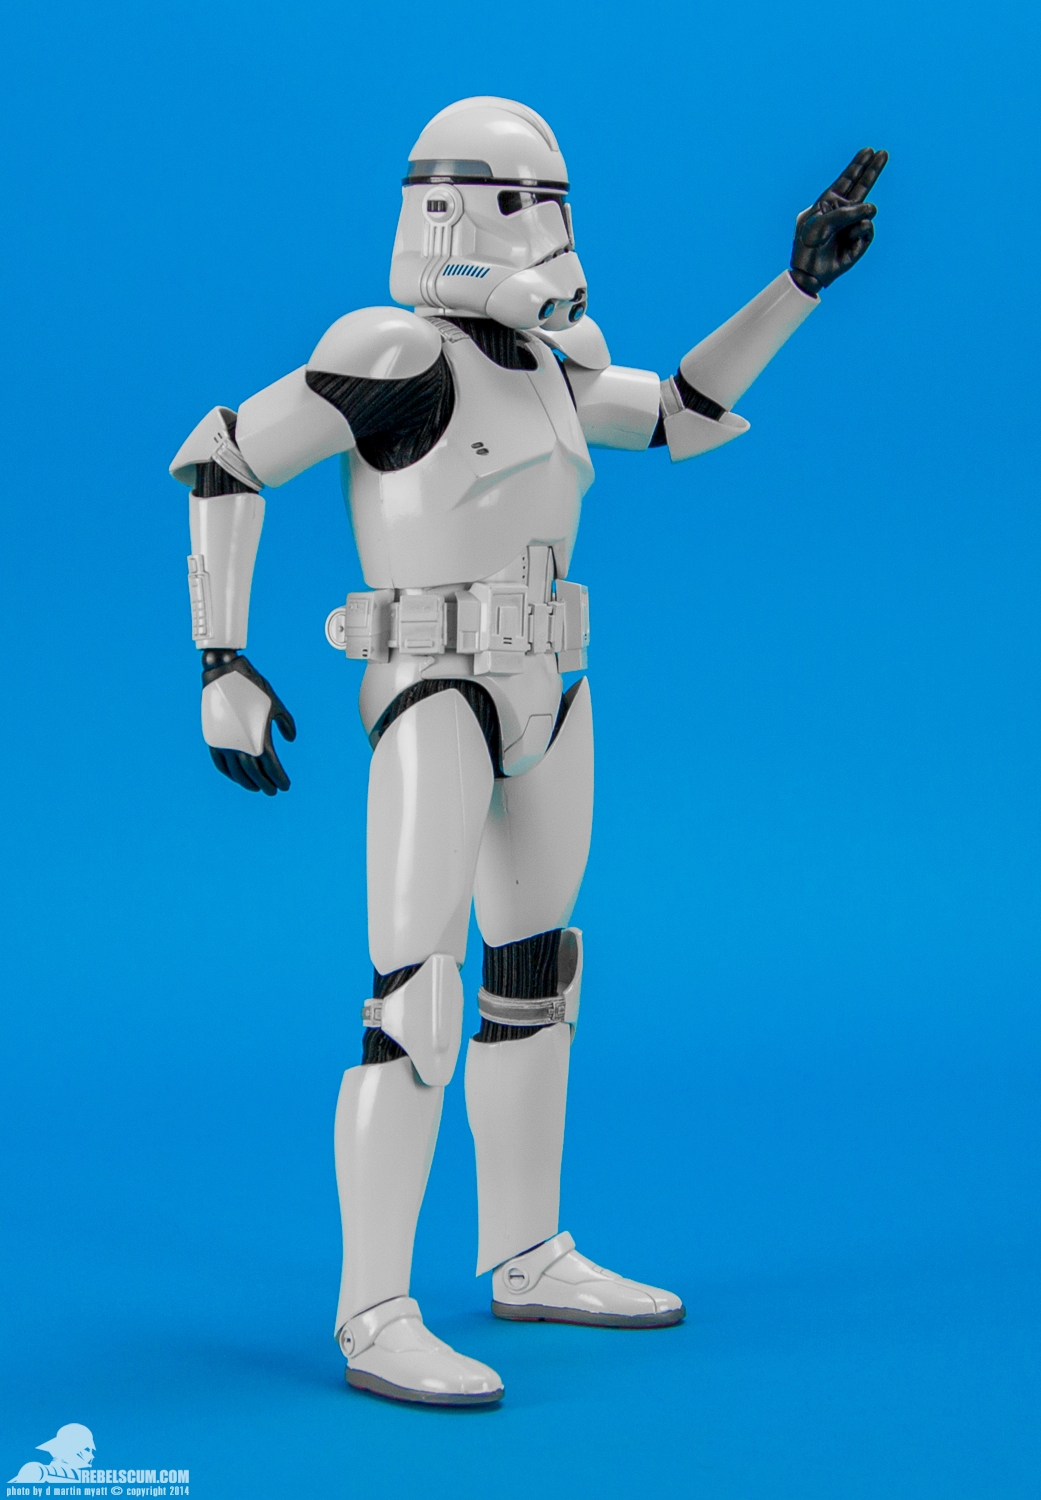 Shiny-Clone-Trooper-Deluxe-Sixth-Scale-Figure-Sideshow-006.jpg